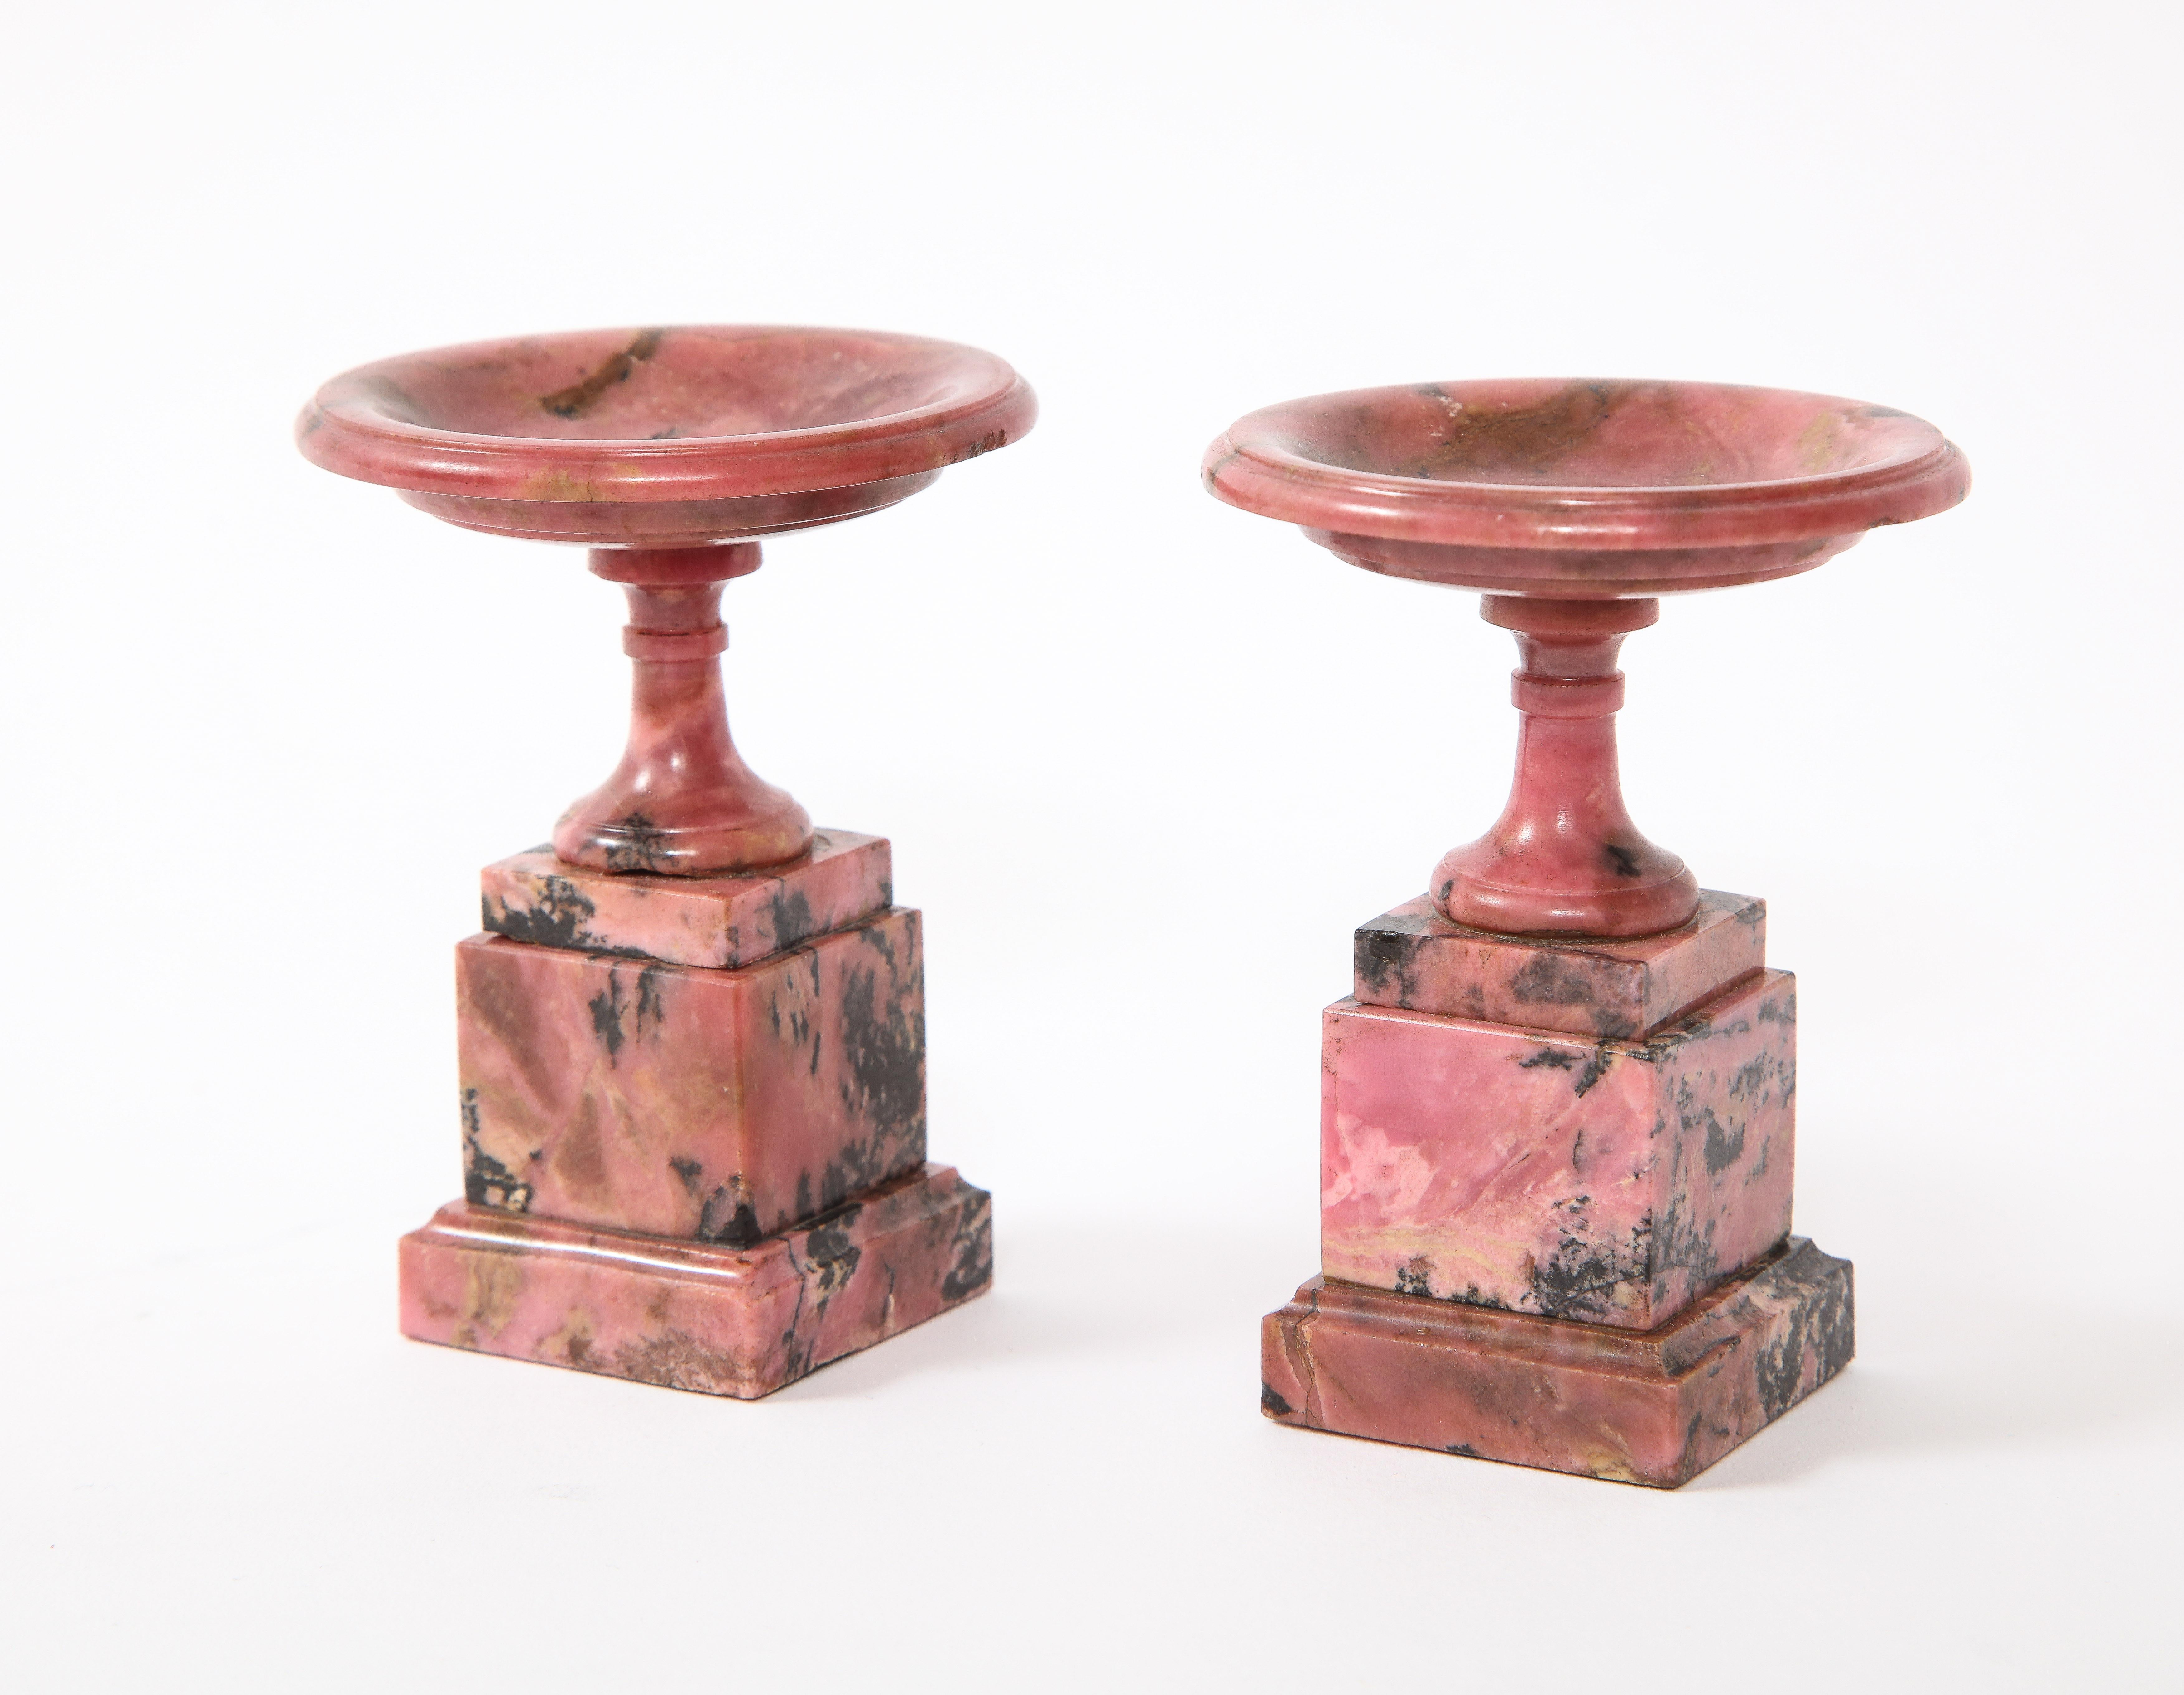 An absolutely gorgeous and rare pair of early 19th century Russian hand carved pink rhodonite Tazzas. The circular dish above a baluster-form socle, resting on a square stepped spreading pedestal. Rhodonite tazzas like these are extremely difficult